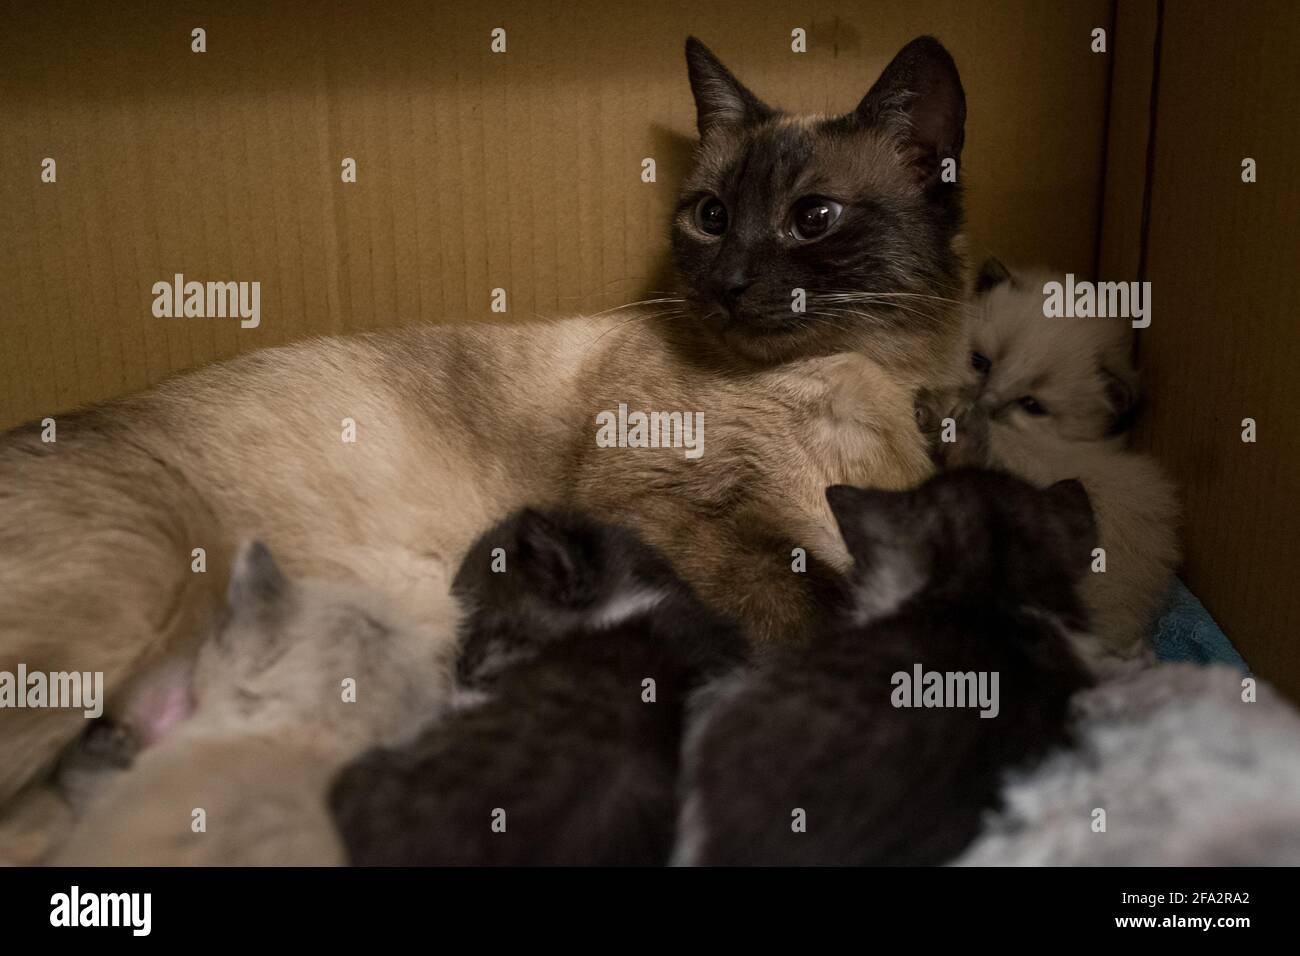 A mother cat with her kittens sleeping next to her in a cardboard box Stock Photo